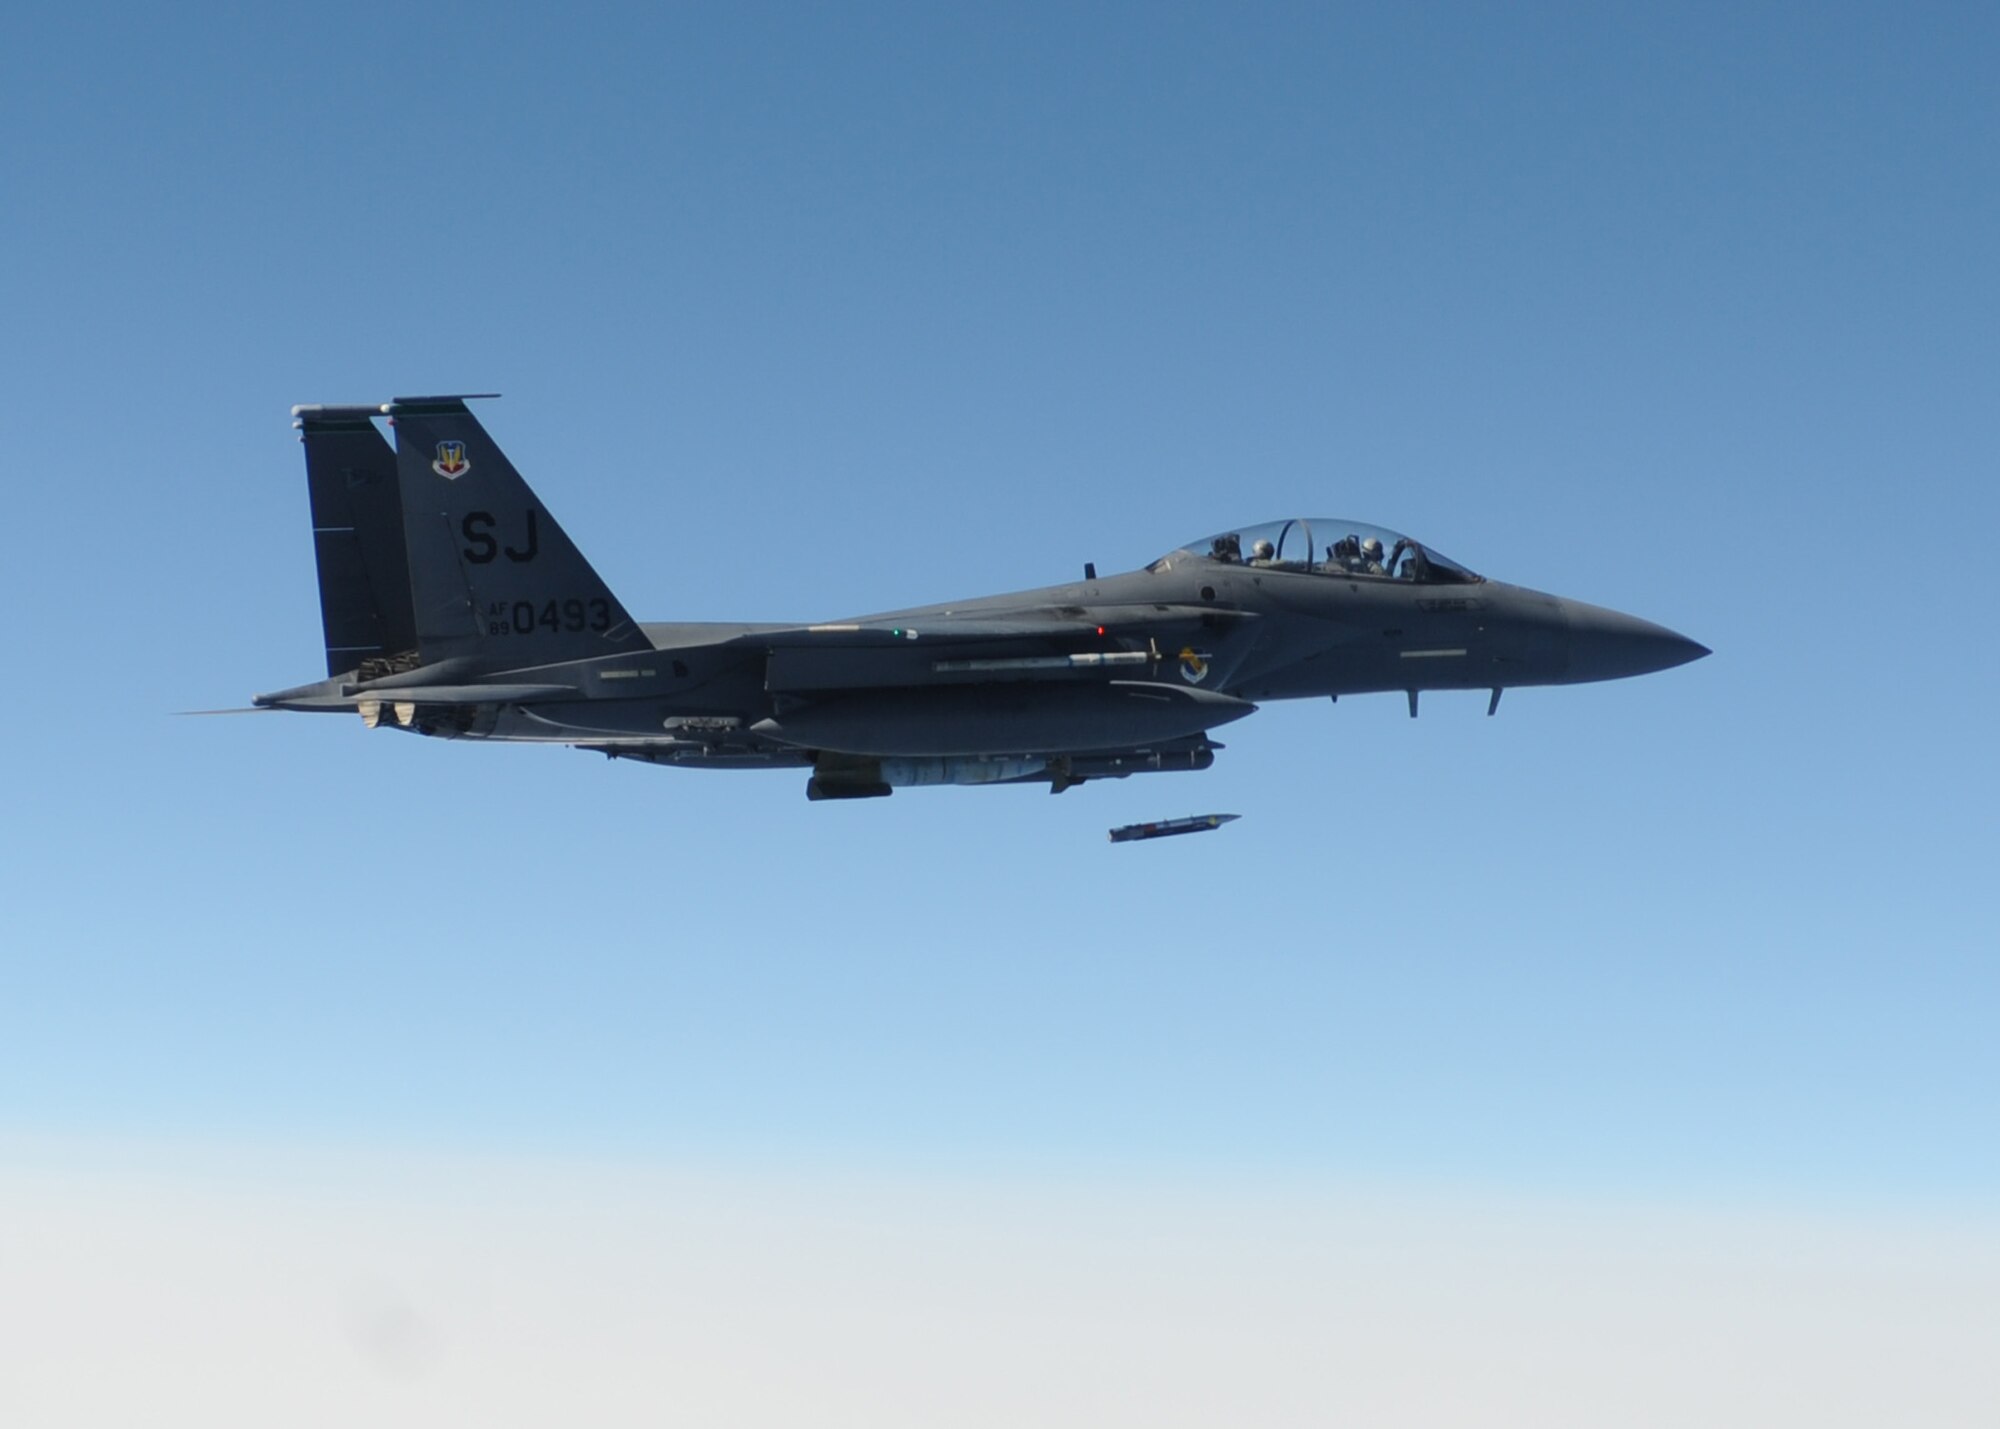 An F-15E Strike Eagle from the 4th Fighter Wing drops a Small Diameter Bomb during a Combat Hammer mission Feb. 3 at Eglin Air Force Base, Fla.  Combat Hammer is an Air-to-Ground Weapons System Evaluation Program controlled by the 86th Fighter Weapons Squadron.  The F-15s from Seymour Johnson AFB, N.C., participated in the week-long evaluation dropping GPS and laser-guided weapons.  The WSEP was the first evaluation of SDBs at Eglin and first evaluation of Laser Joint Direct Attack Munitions in a Combat Hammer.  The WSEP program, run by the 53d Weapons Evaluation Group, is used to evaluate the effectiveness and suitability of combat air force weapon systems. The evaluations are accomplished during tactical deliveries of fighter, bomber and unmanned aerial system precision guided munitions, on realistic targets with air-to-air and surface-to-air defenses. For many of the aircrew participating in WSEP, it is the first time employing live weapons. This provides a level of combat experience many units face during combat.  (U.S. Air Force photo/Maj. Scott Alford.)